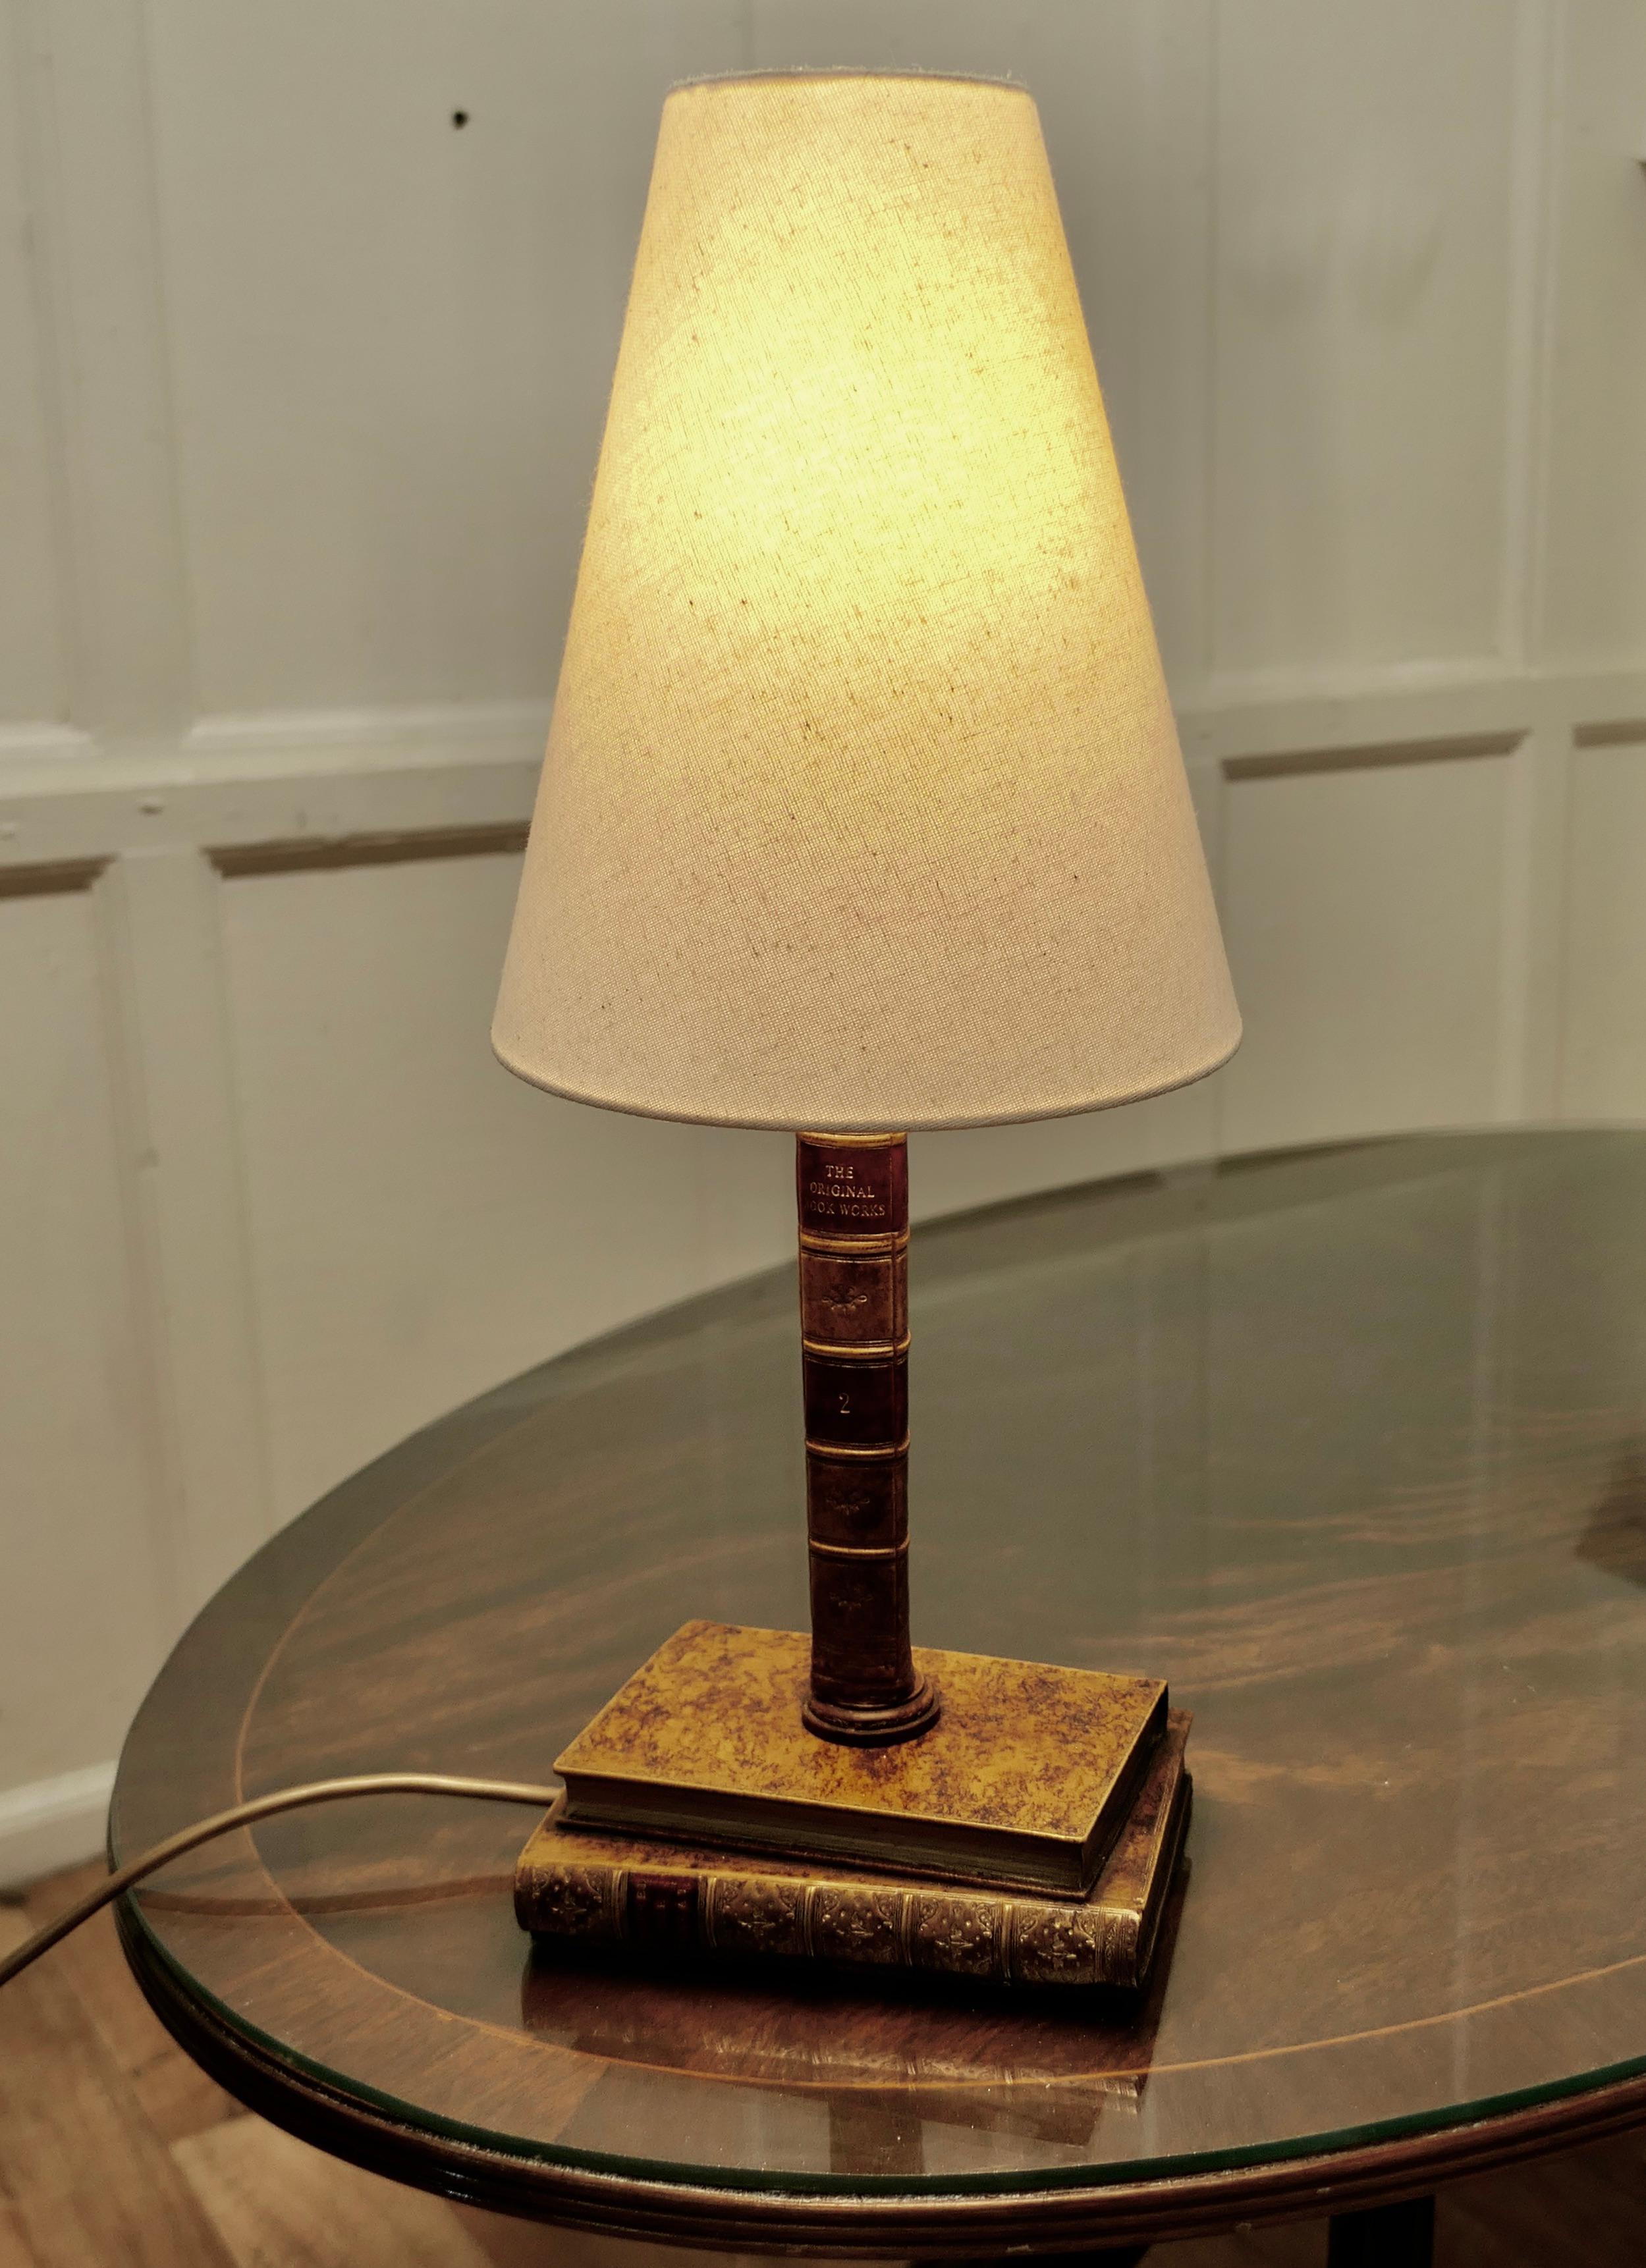 Vintage Novelty Ceramic Trompe-L’oeil desk lamp

The Lamp is made with ceramic leather book spines, a fun Trompe-L’oeil and a very attractive conversation piece. It is in good vintage condition

The lamp is 20” high including the shade and 8” x